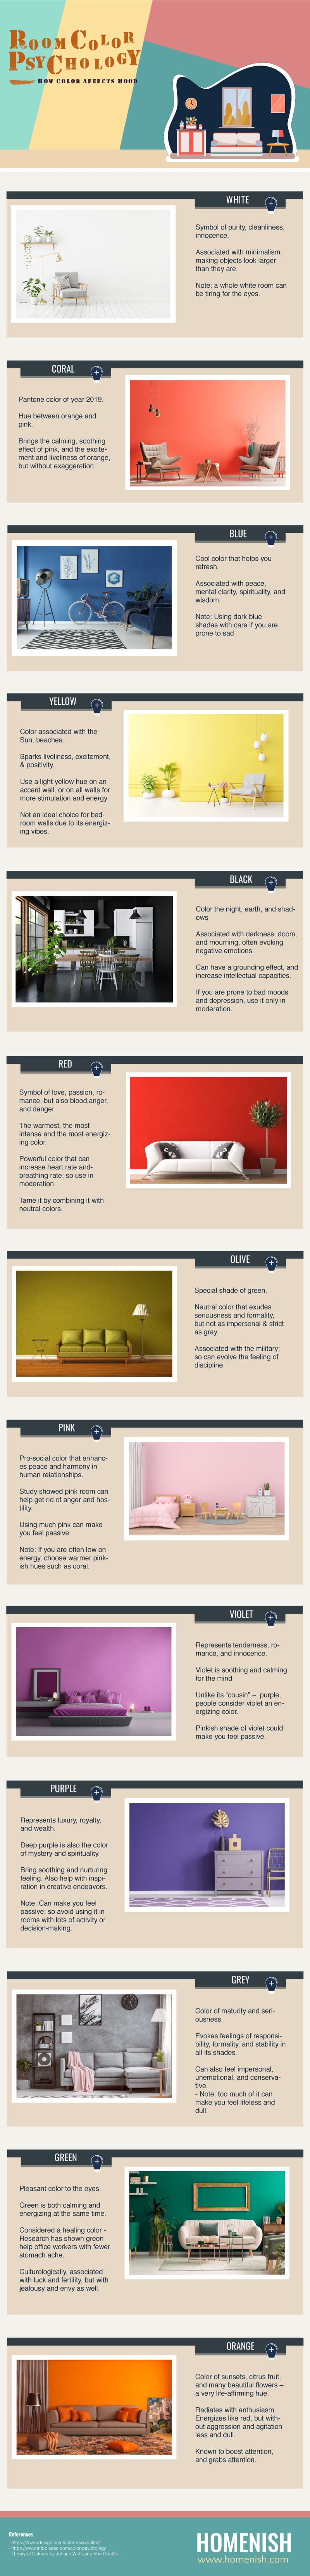 Room Color Psychology Infographic